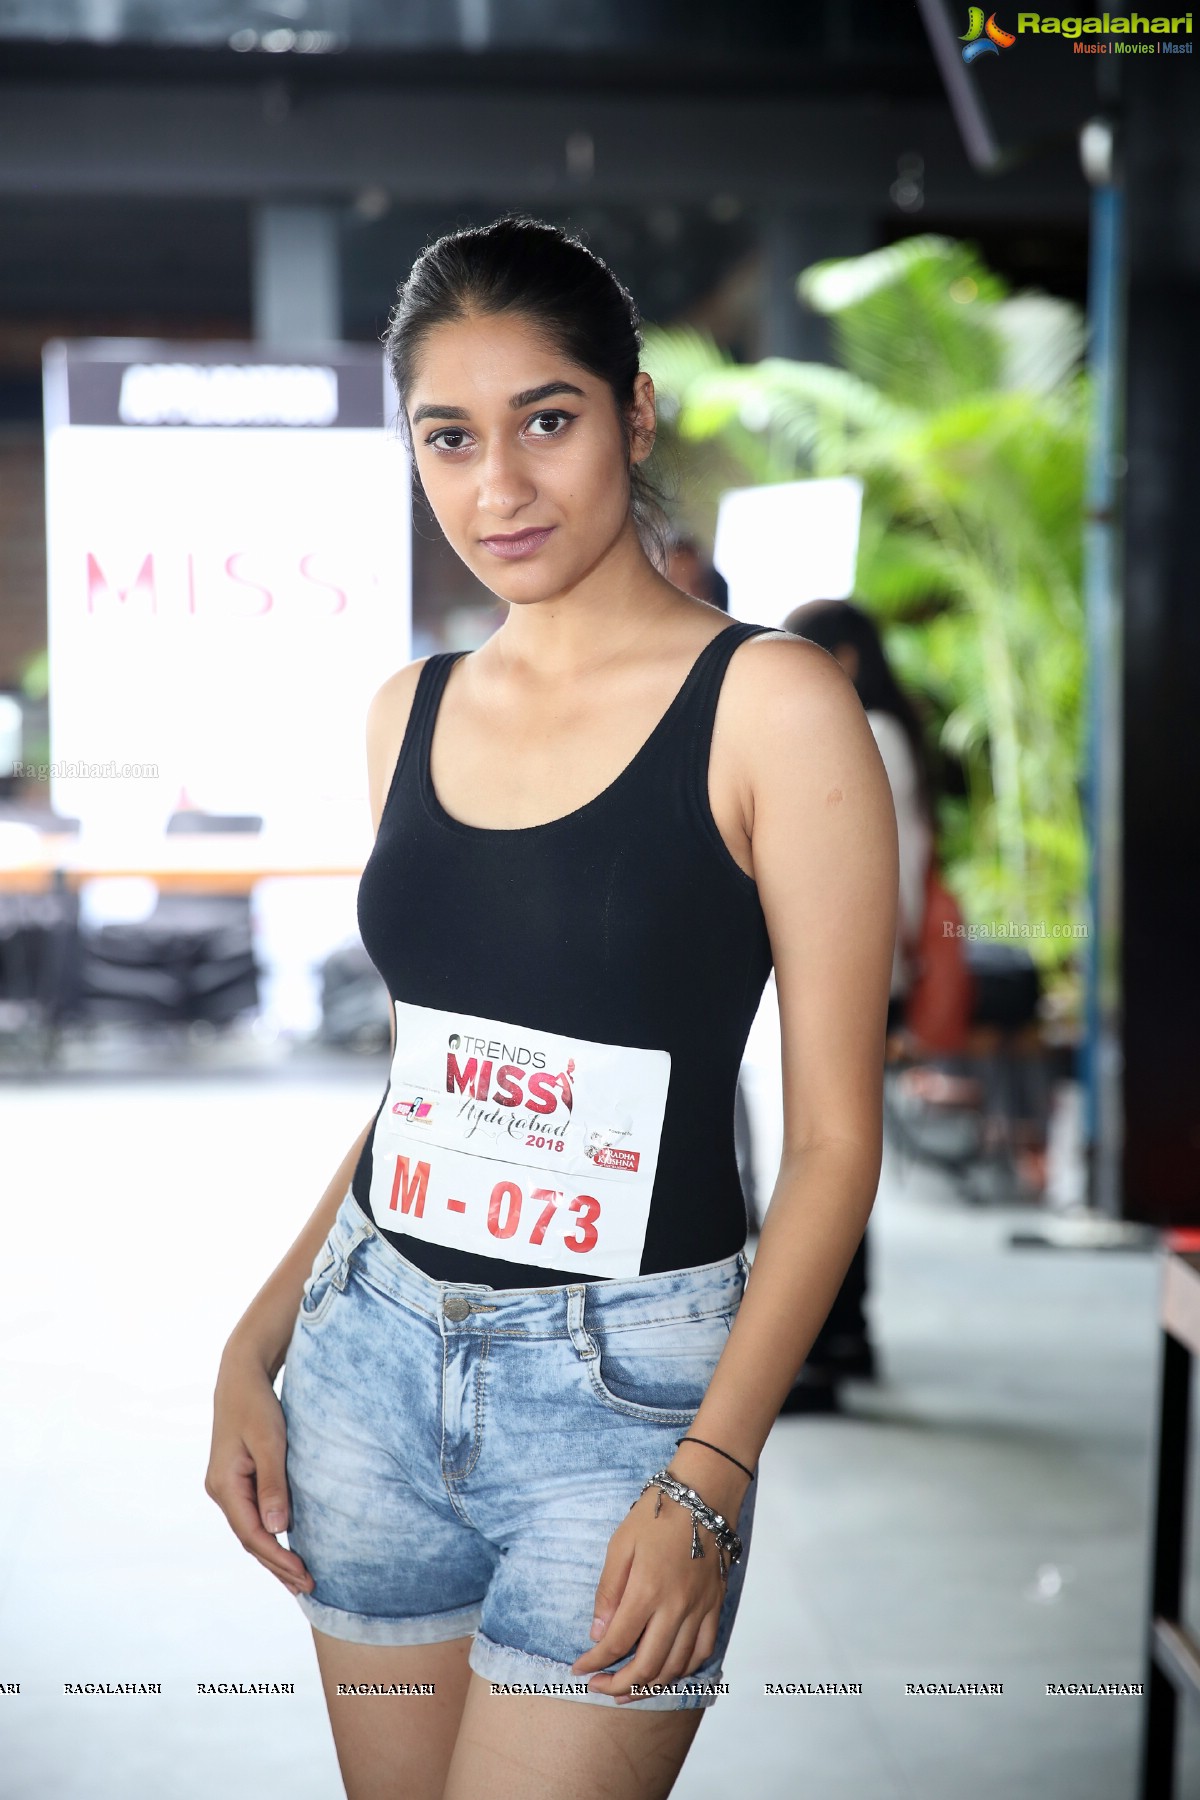 Trends Miss Hyderabad 2018 Auditions (Day 2) at Air Live, Jubilee Hills, Hyderabad	